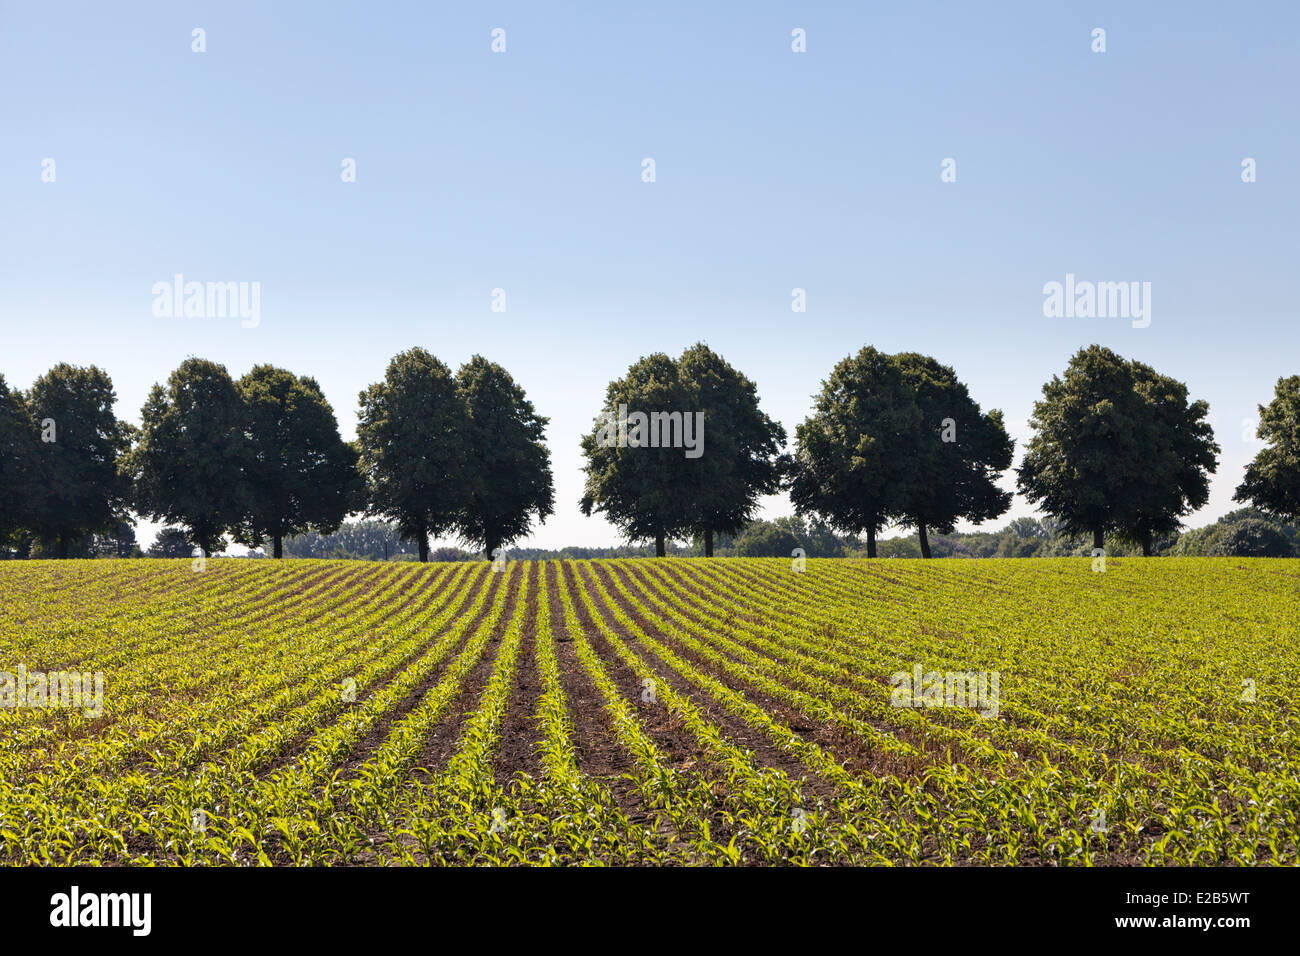 Field with young maize plants and perfect line of trees in background against clear blue sky Stock Photo